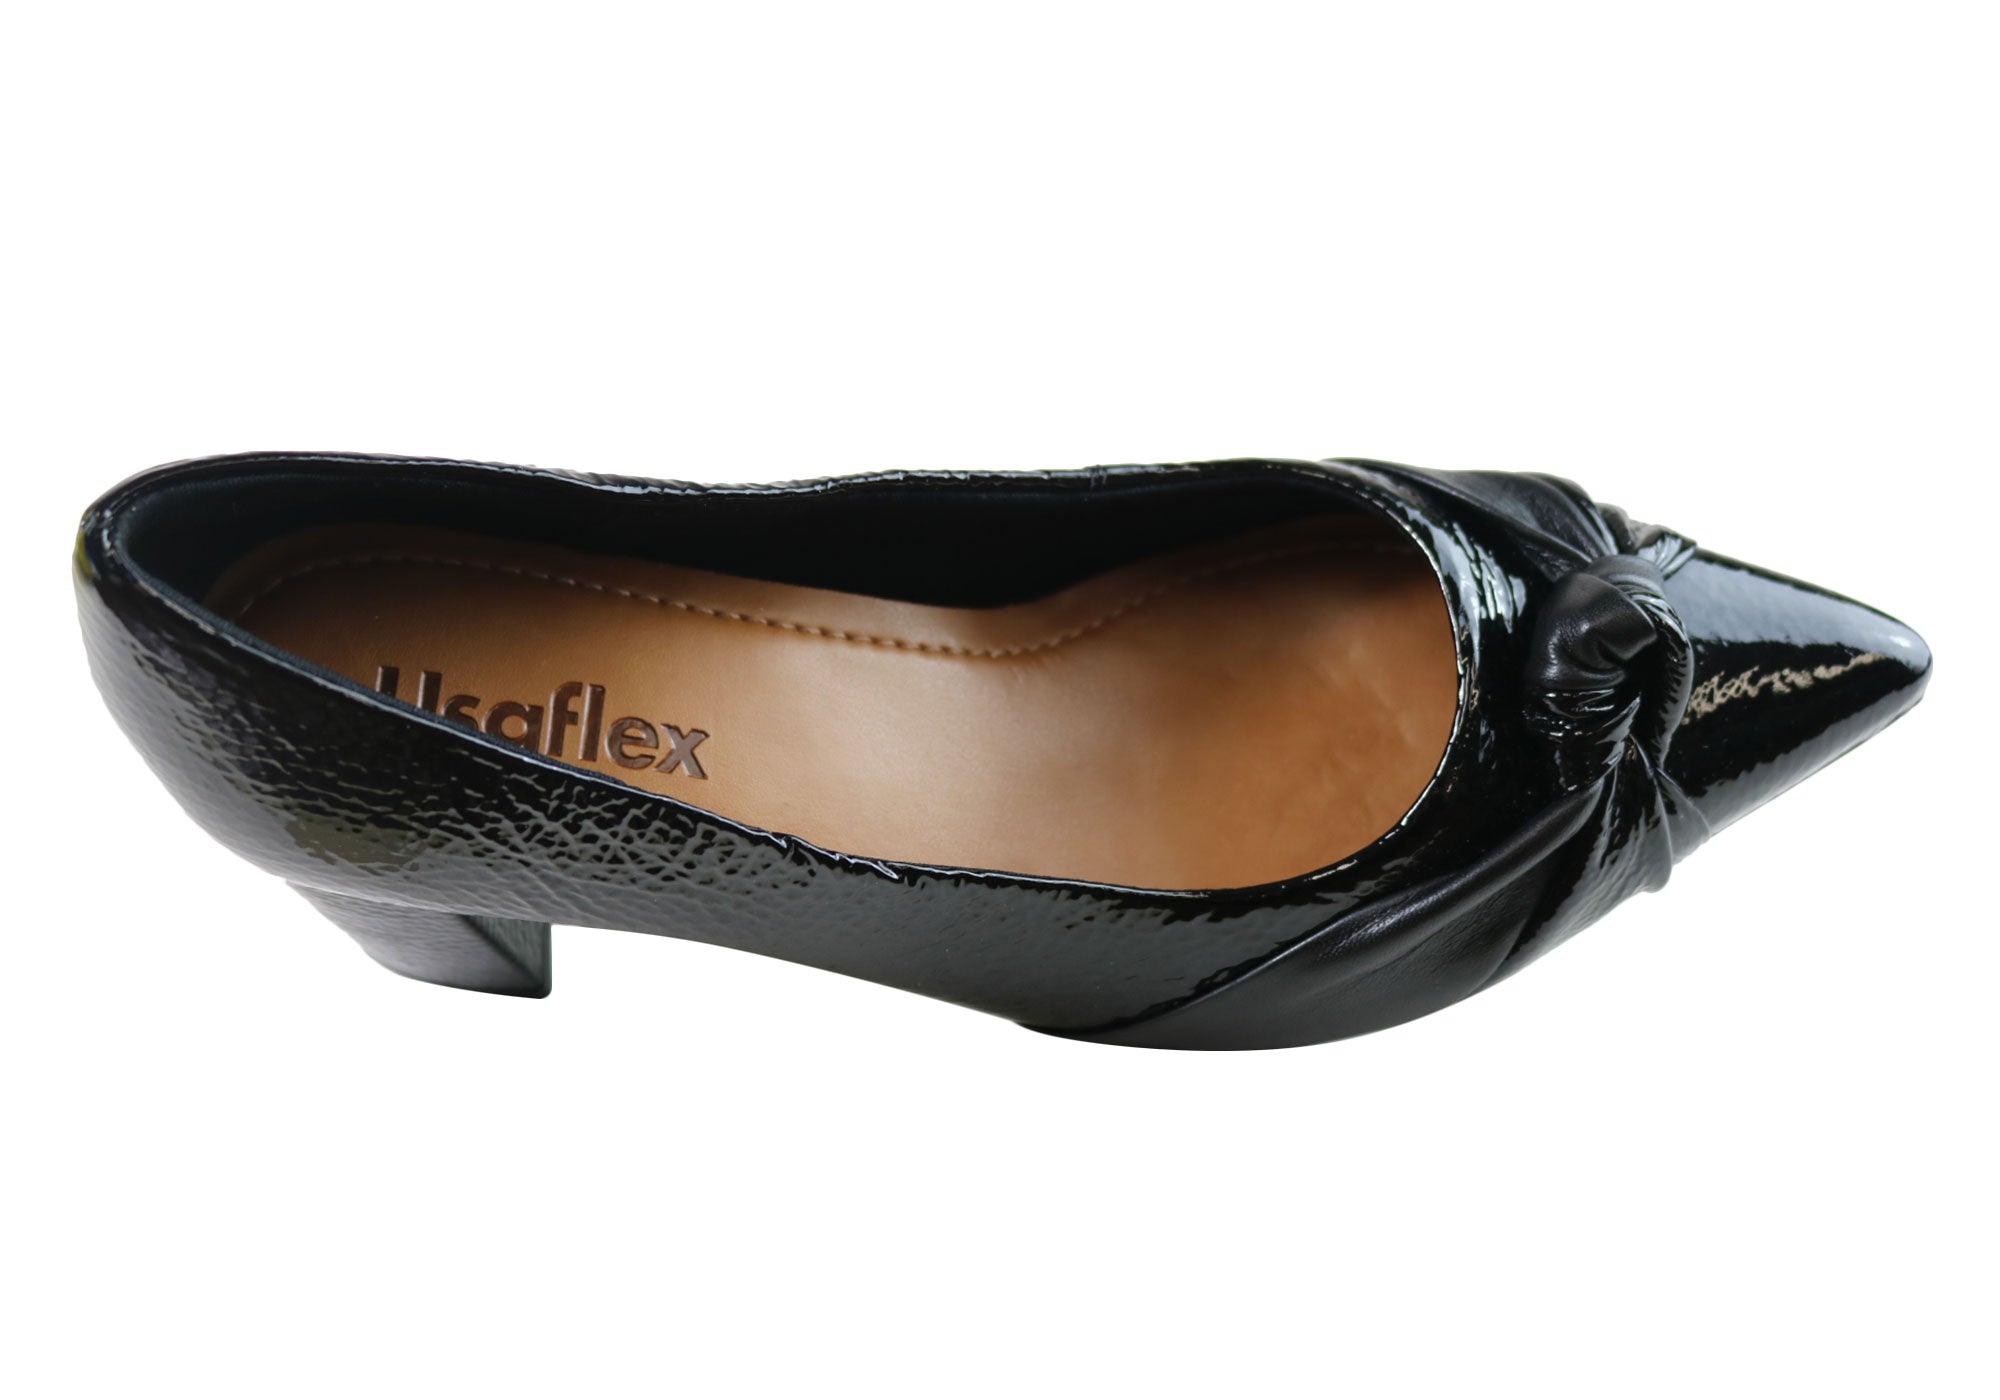 Usaflex Sadie Womens Mid Heel Leather Shoes Made In Brazil